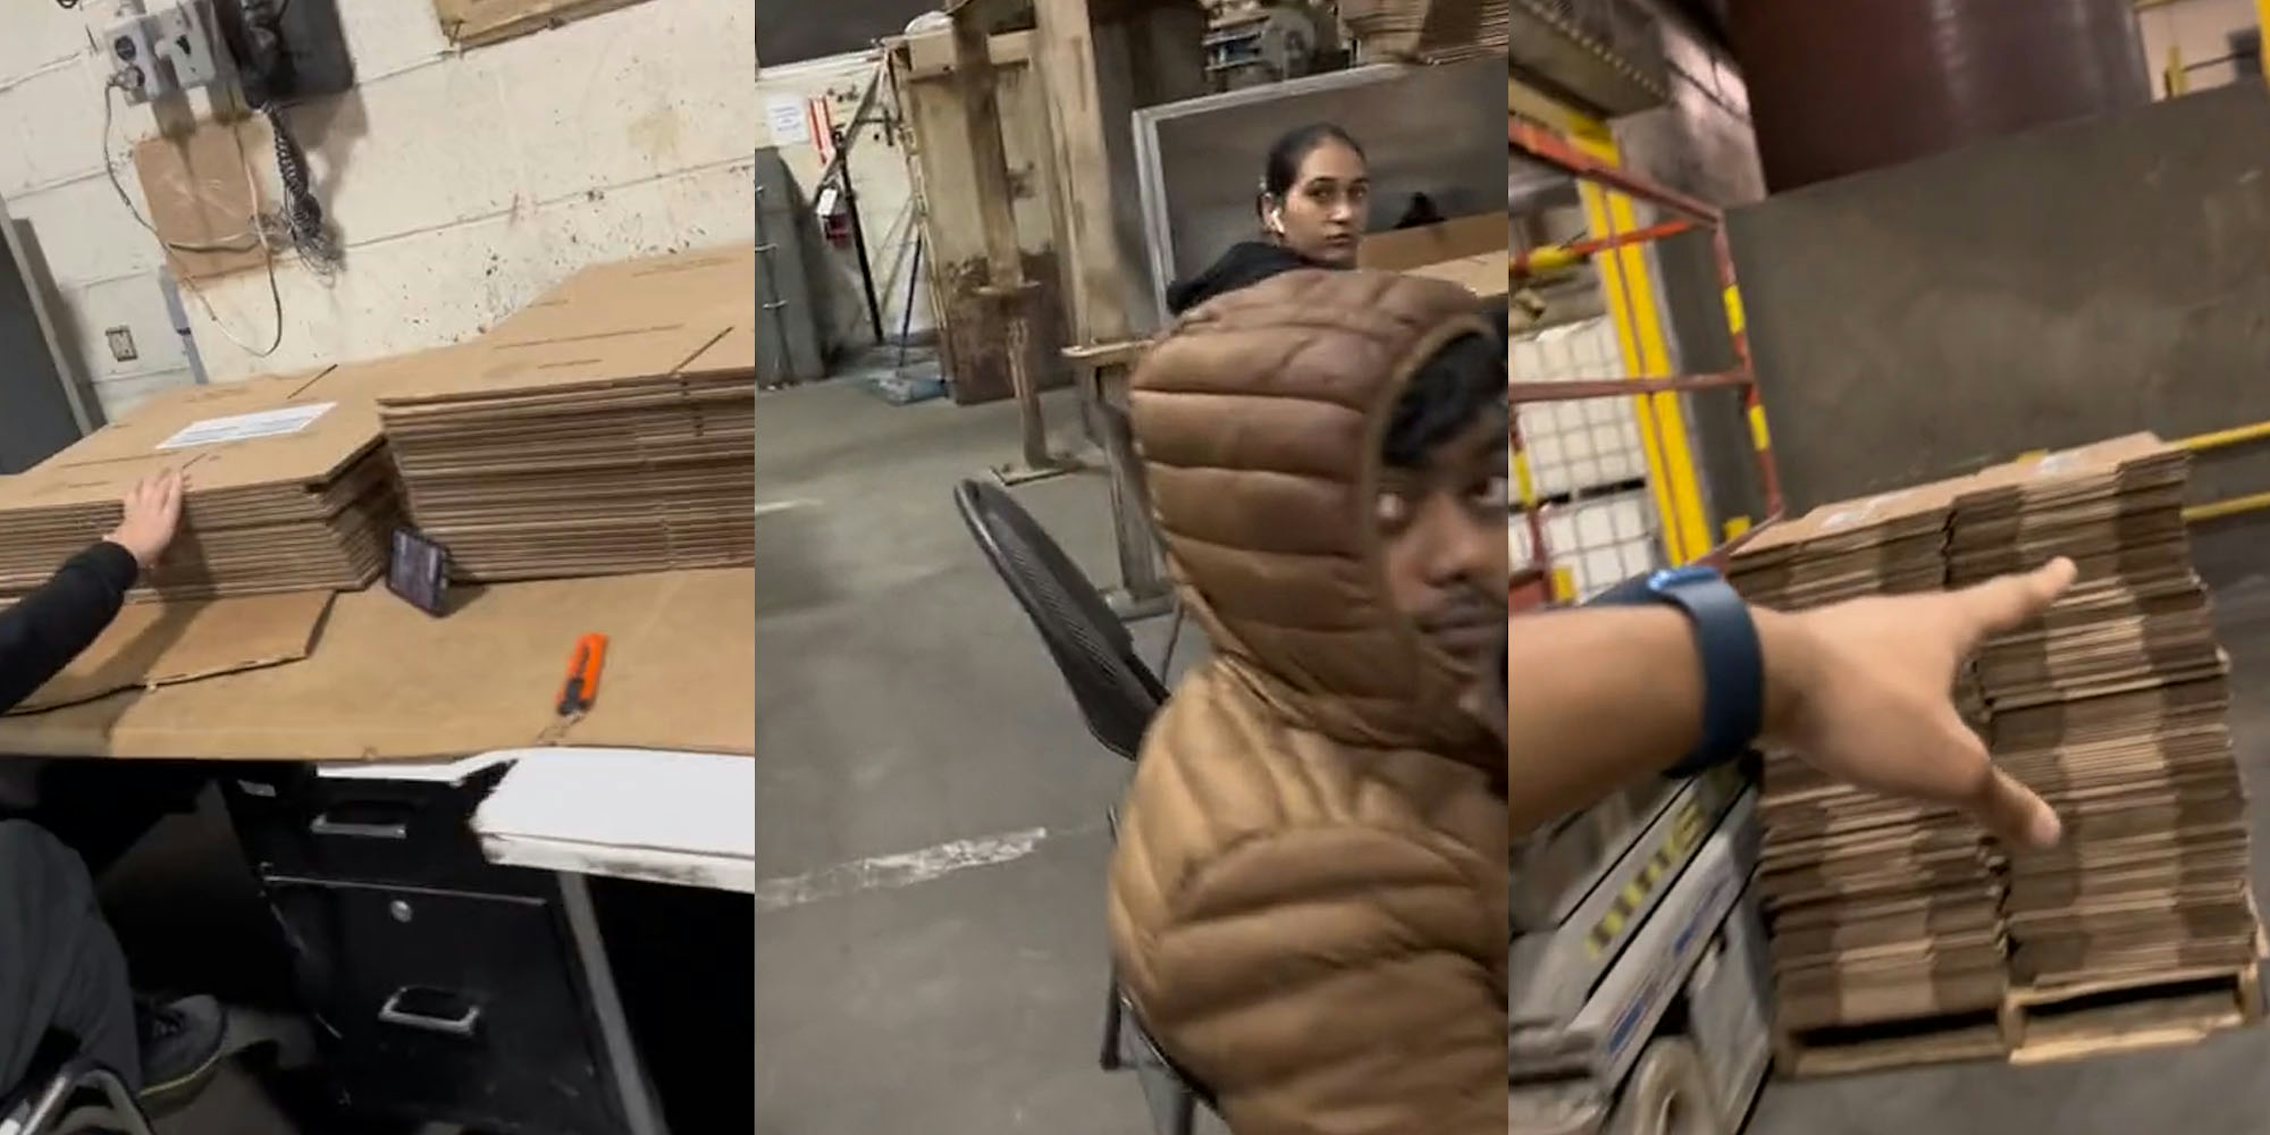 workers handling cardboard boxes on table with phone stood up (l) Coworkers sitting in chairs (c) worker pointing towards large pile of cardboard boxes (r)